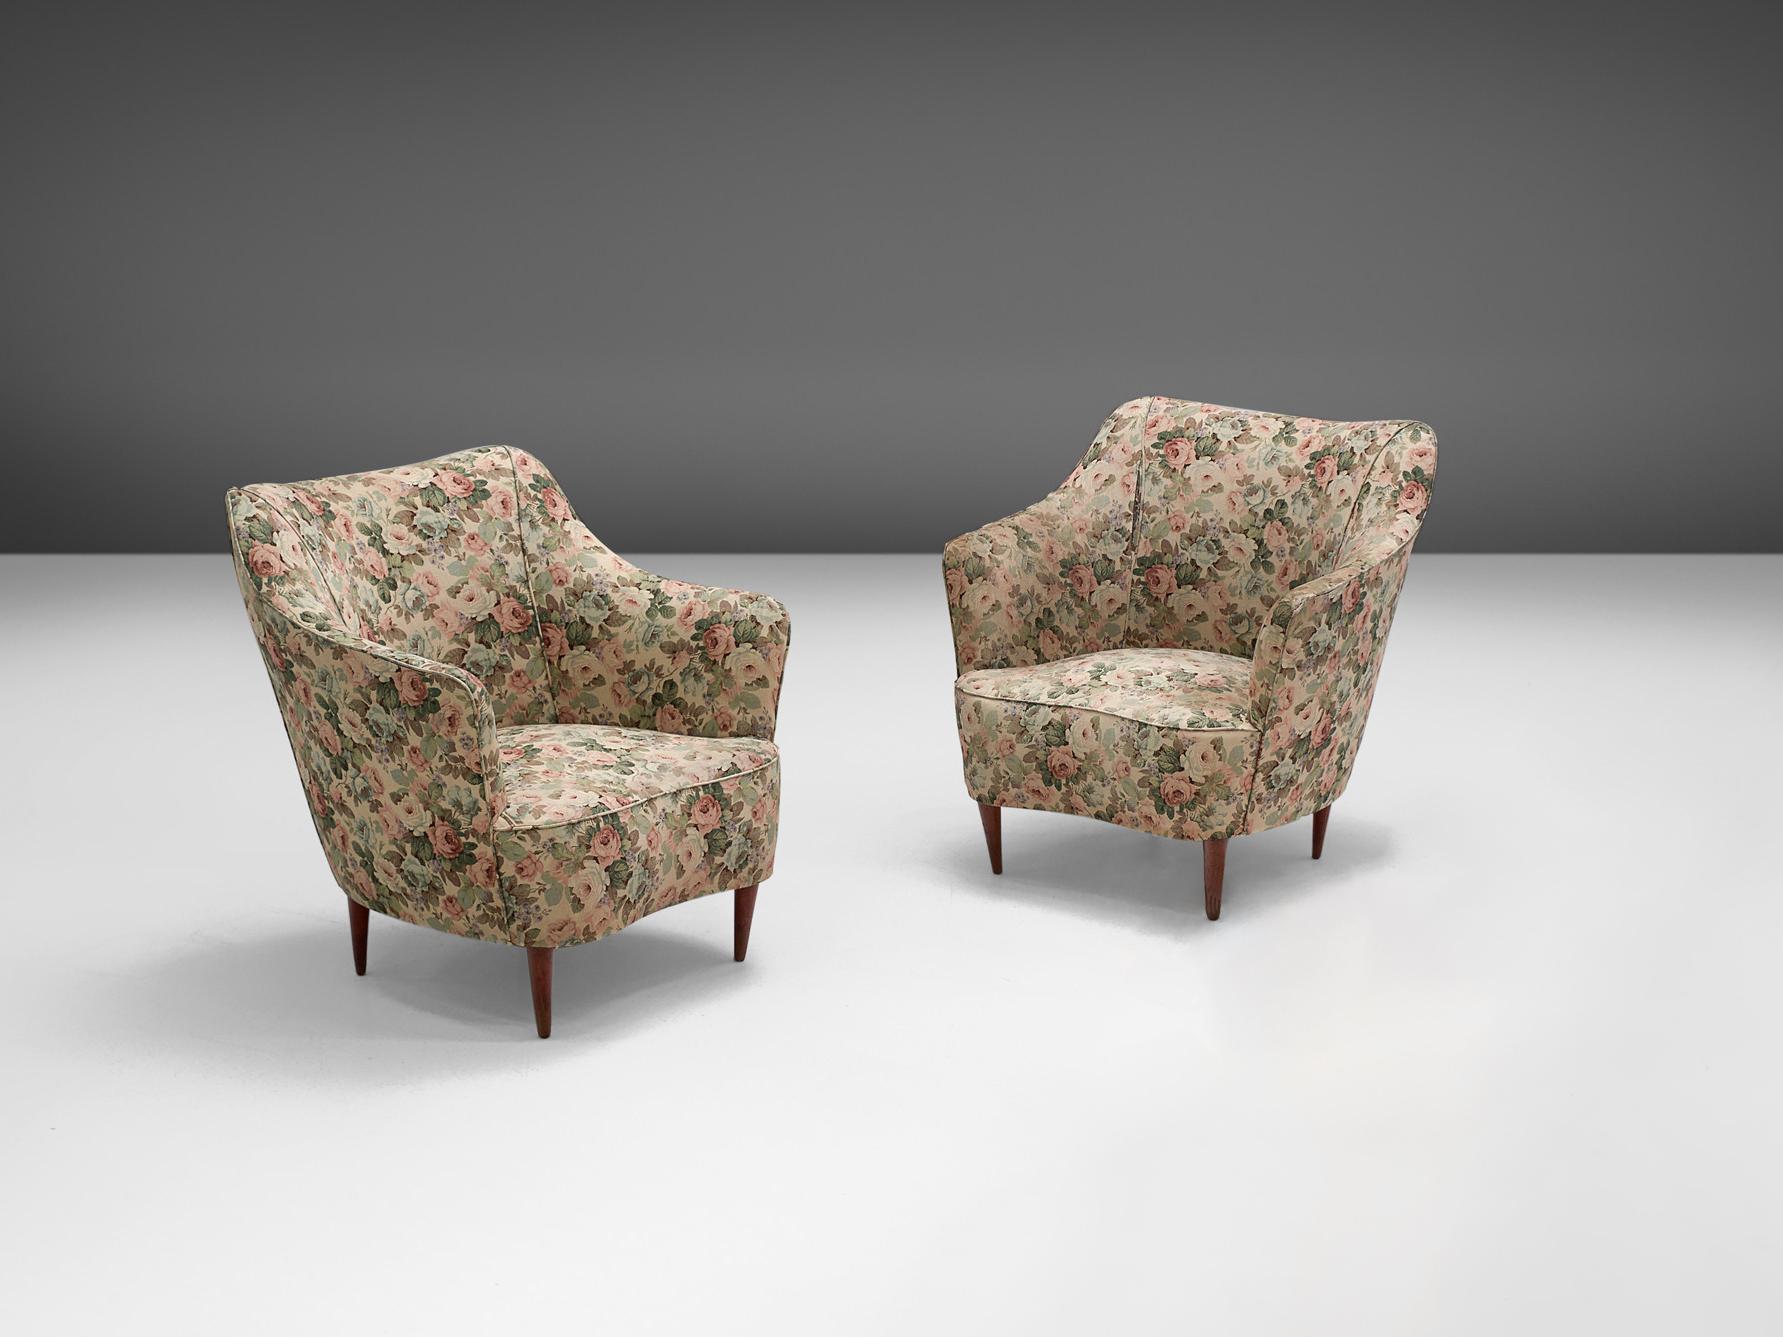 In the style of Gio Ponti, pair of lounge chairs, wood and floral fabric, Italy, 1940s.

Elegant and romantic club chairs designed in the style of Gio Ponti (1891-1979) with original upholstery of fauna and flora. The design is based on a splendid